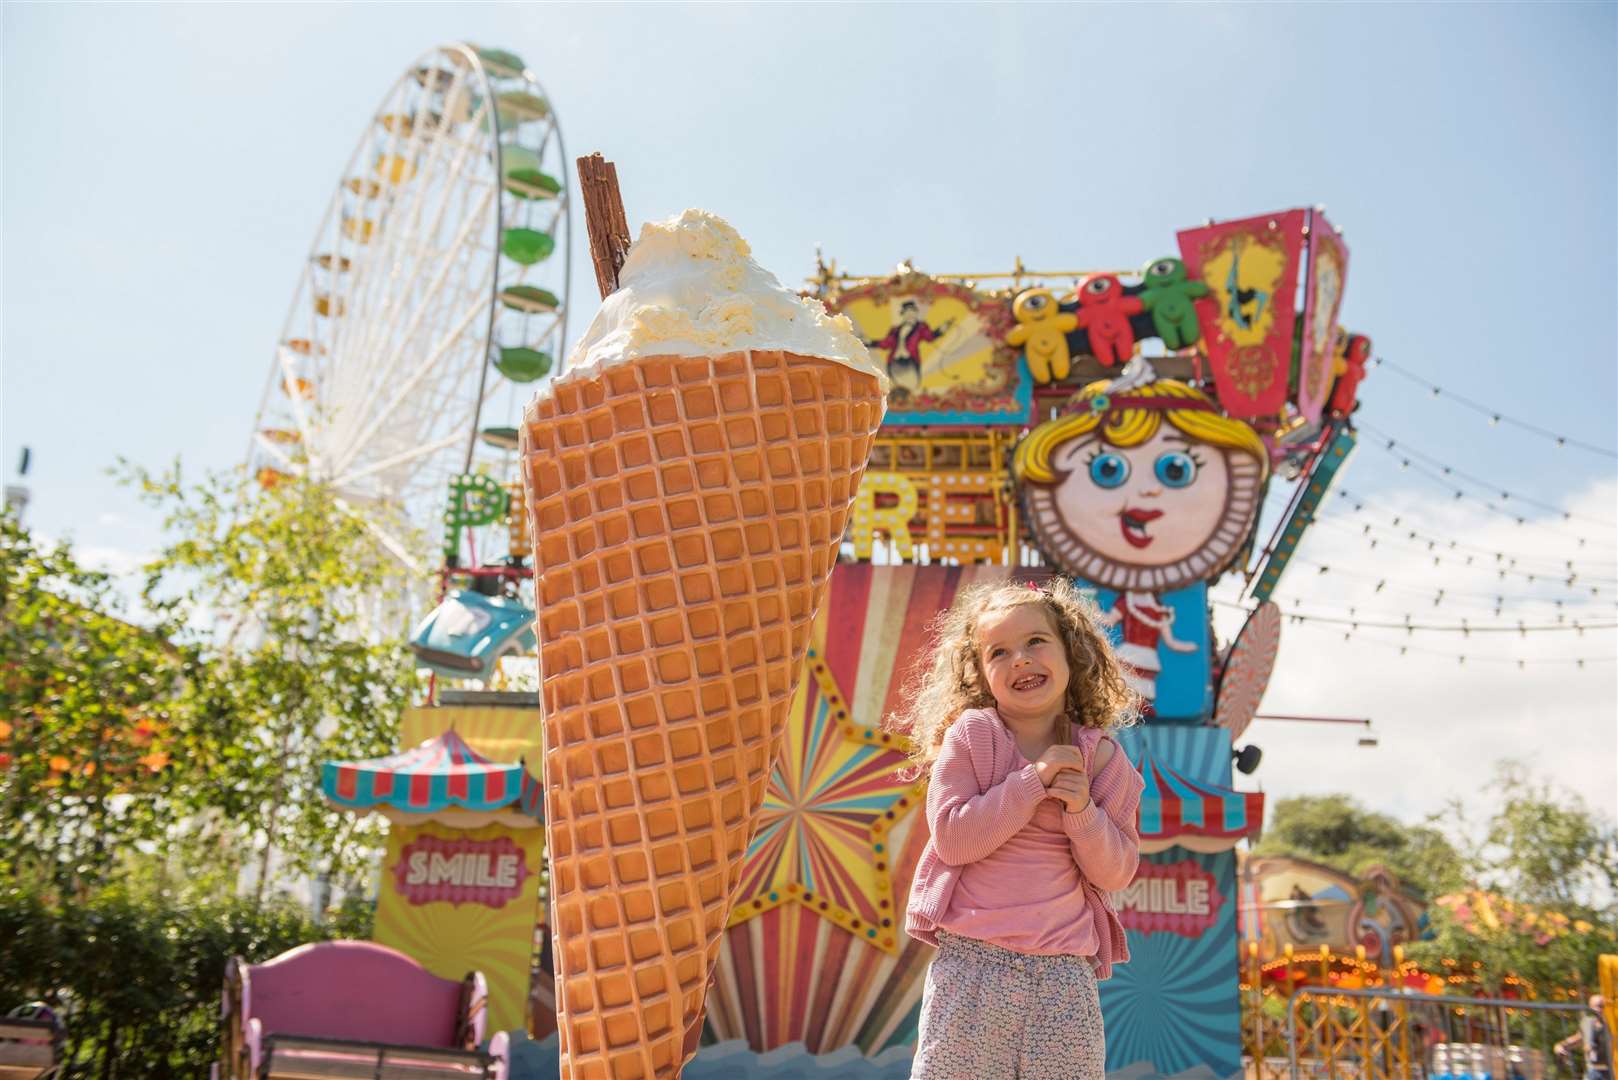 Dreamland is celebrating its 99th birthday with a giant ice cream cone. Three-year-old Edith was given a sneak peak (13335211)